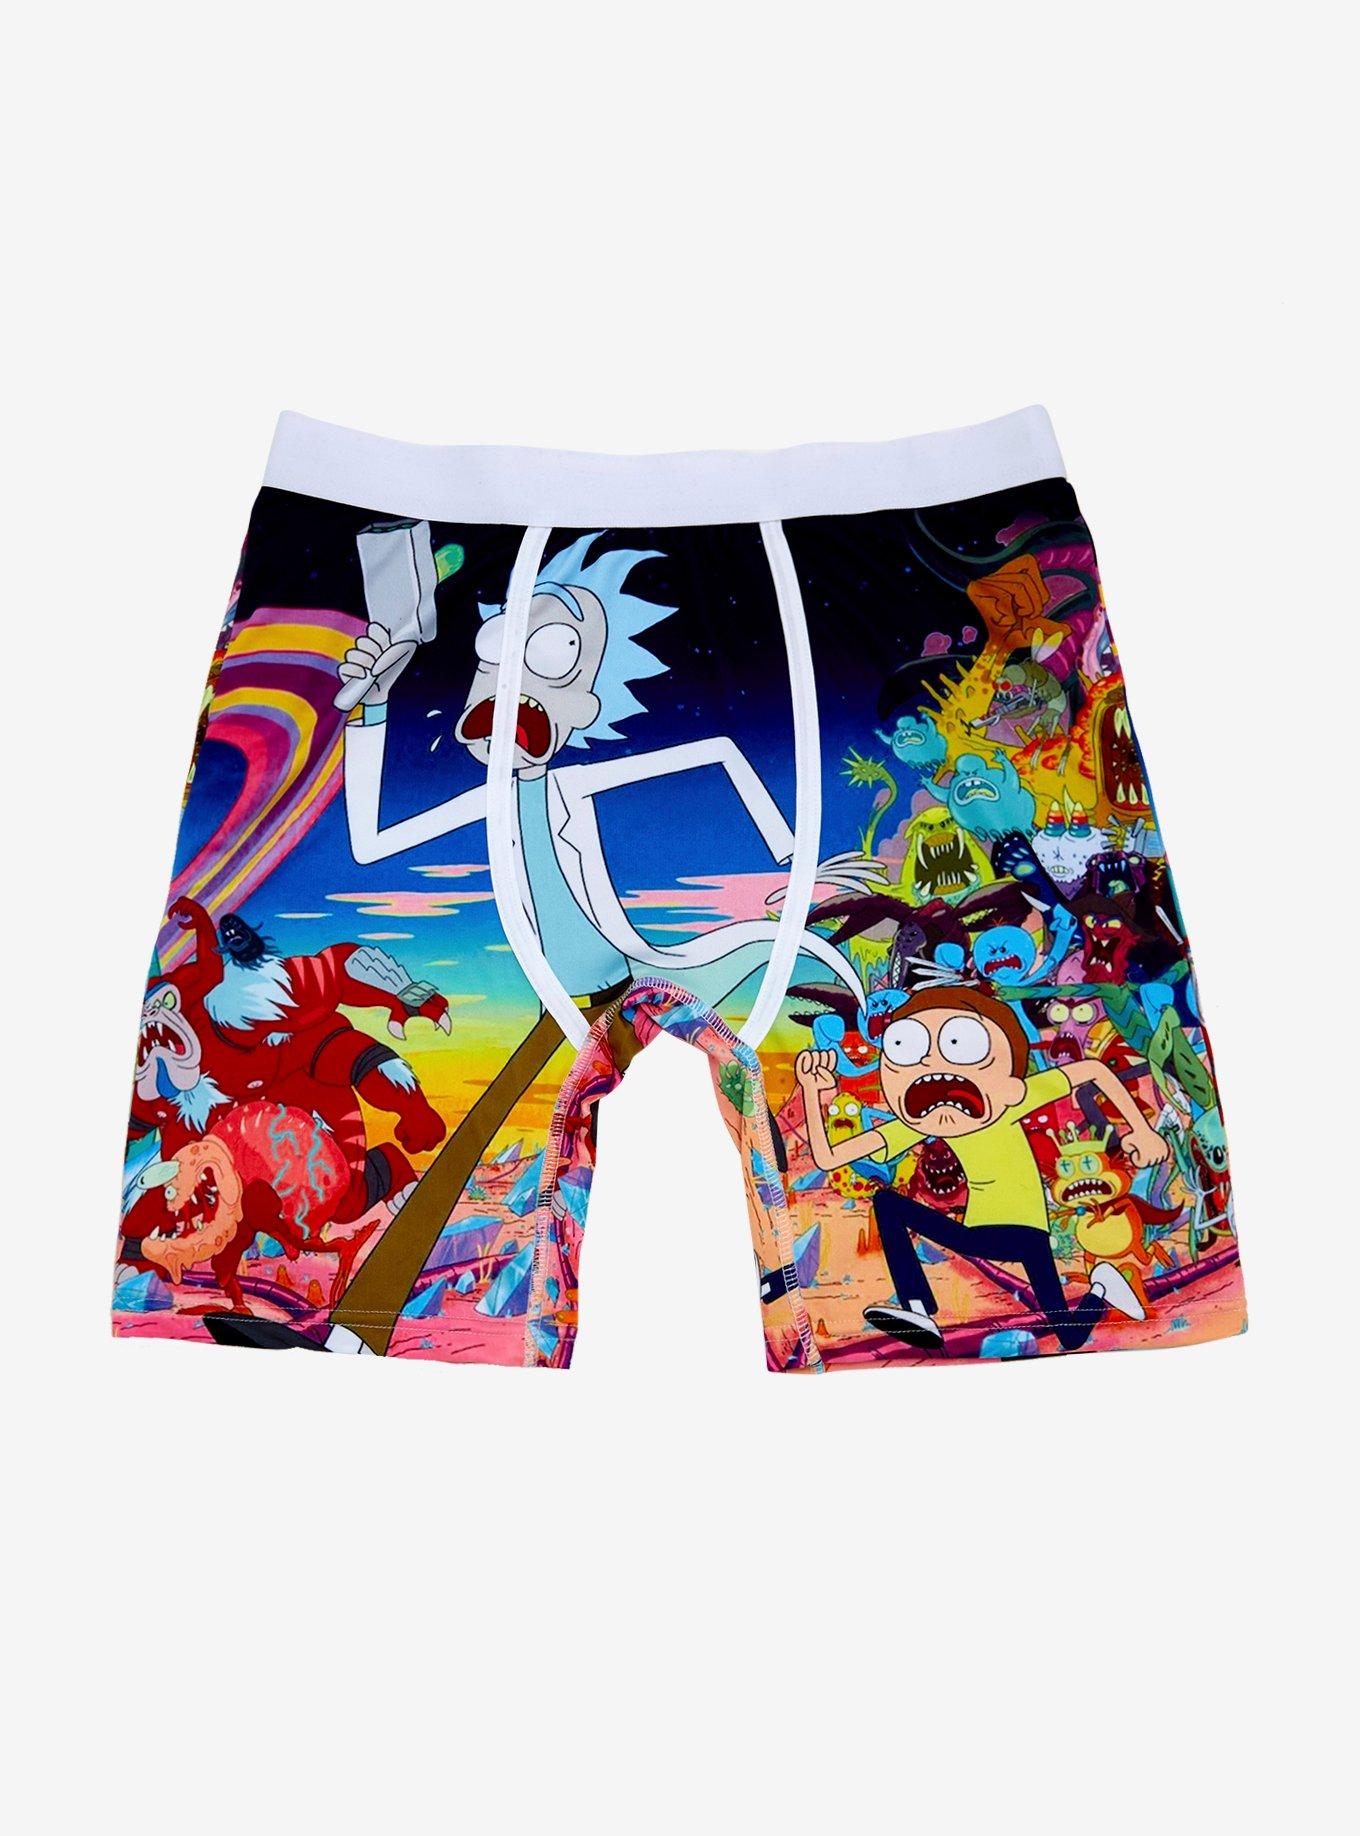 Rick And Morty Chase Boxer Briefs, MULTI, alternate